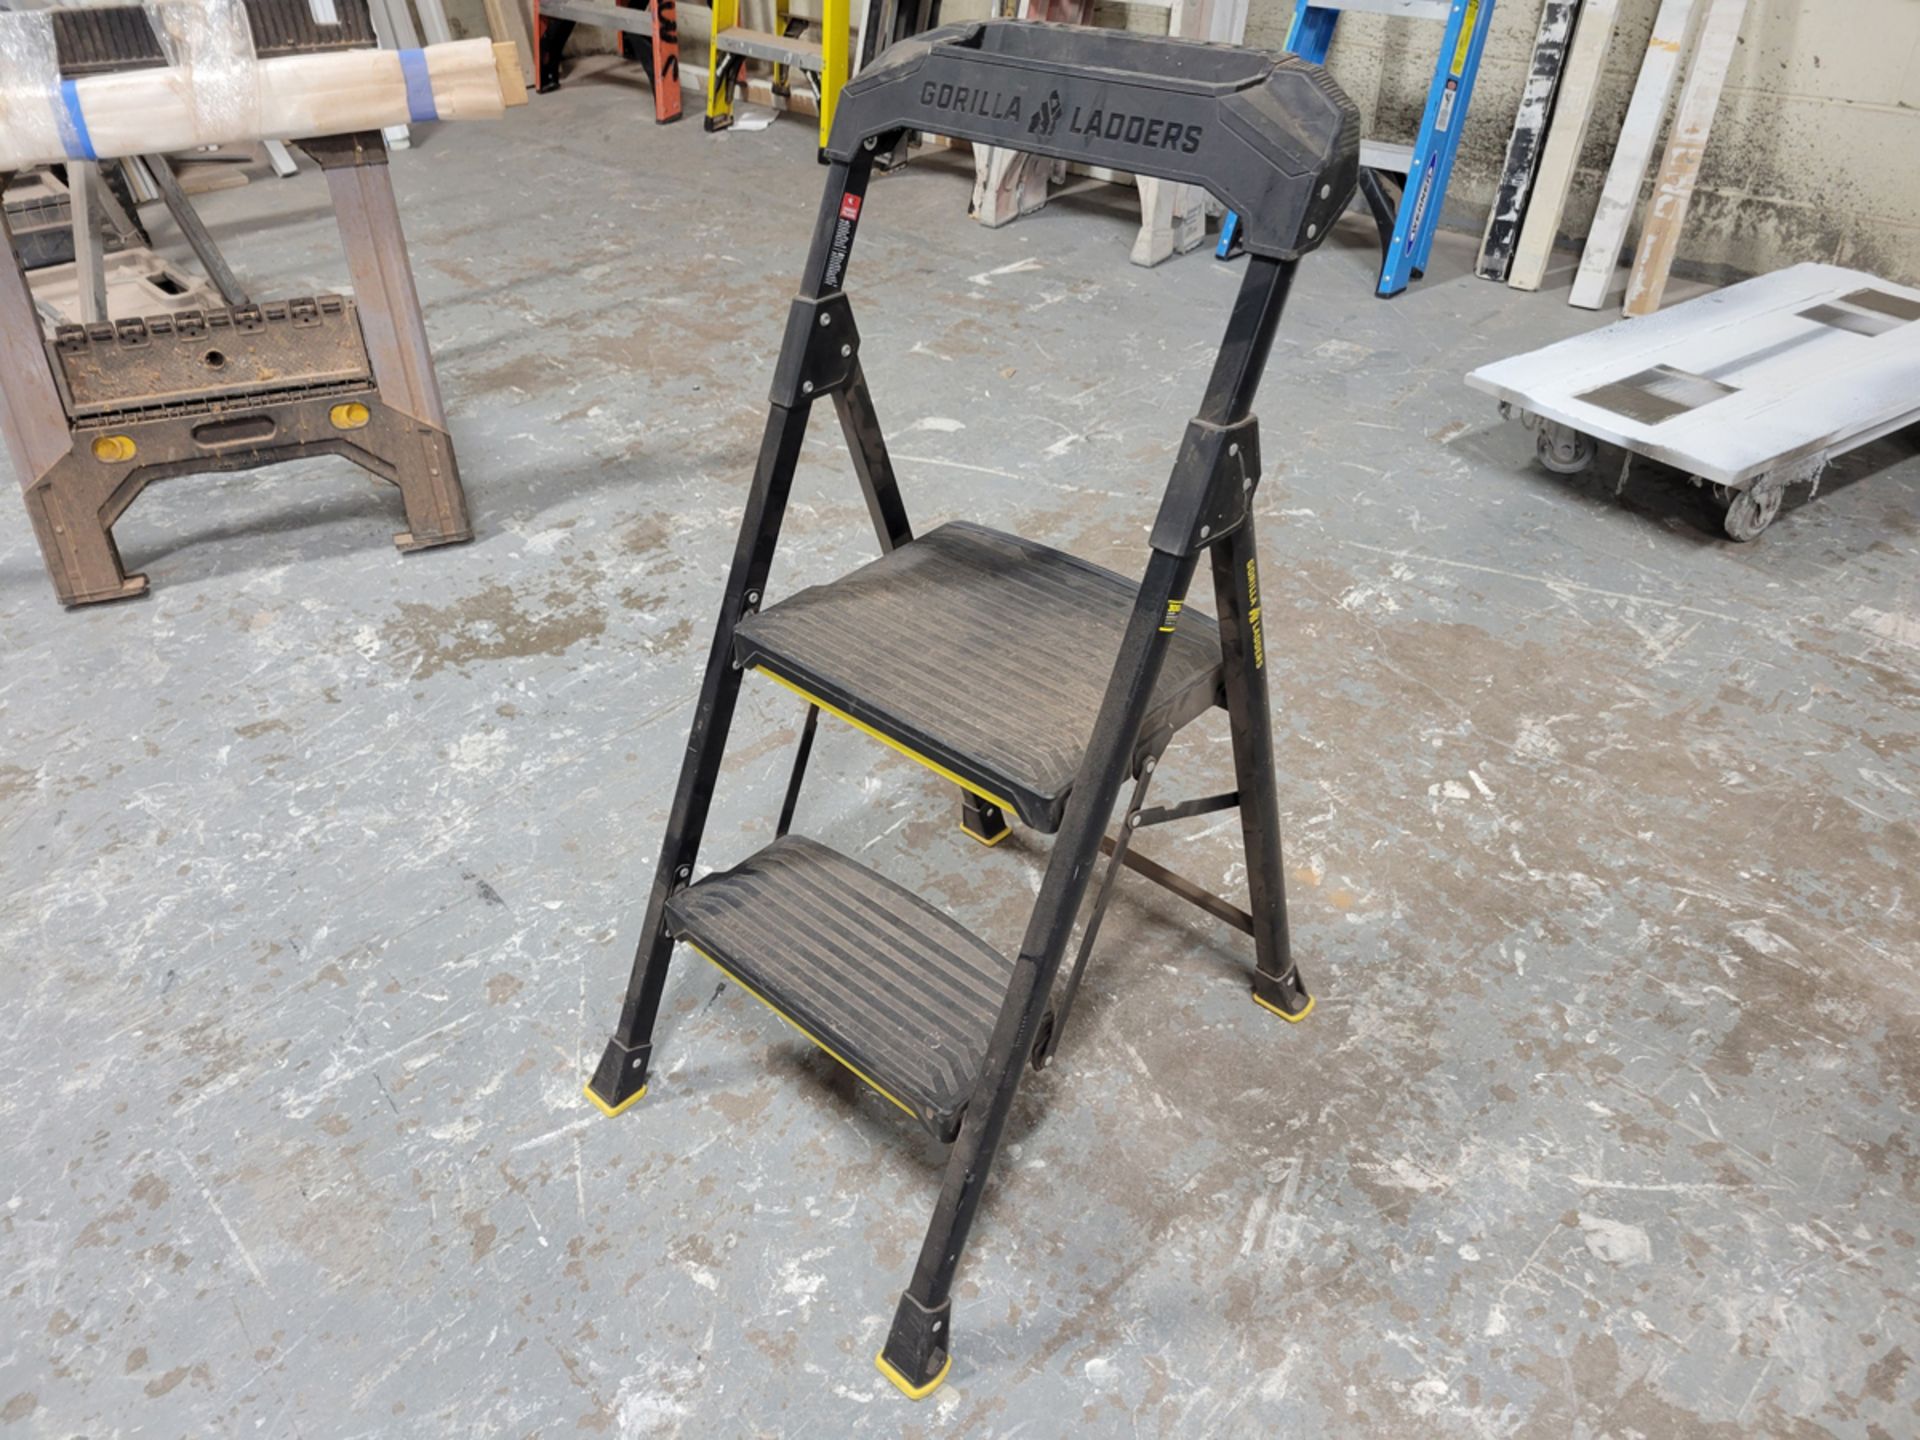 Gorilla Ladders Two-Step Stool